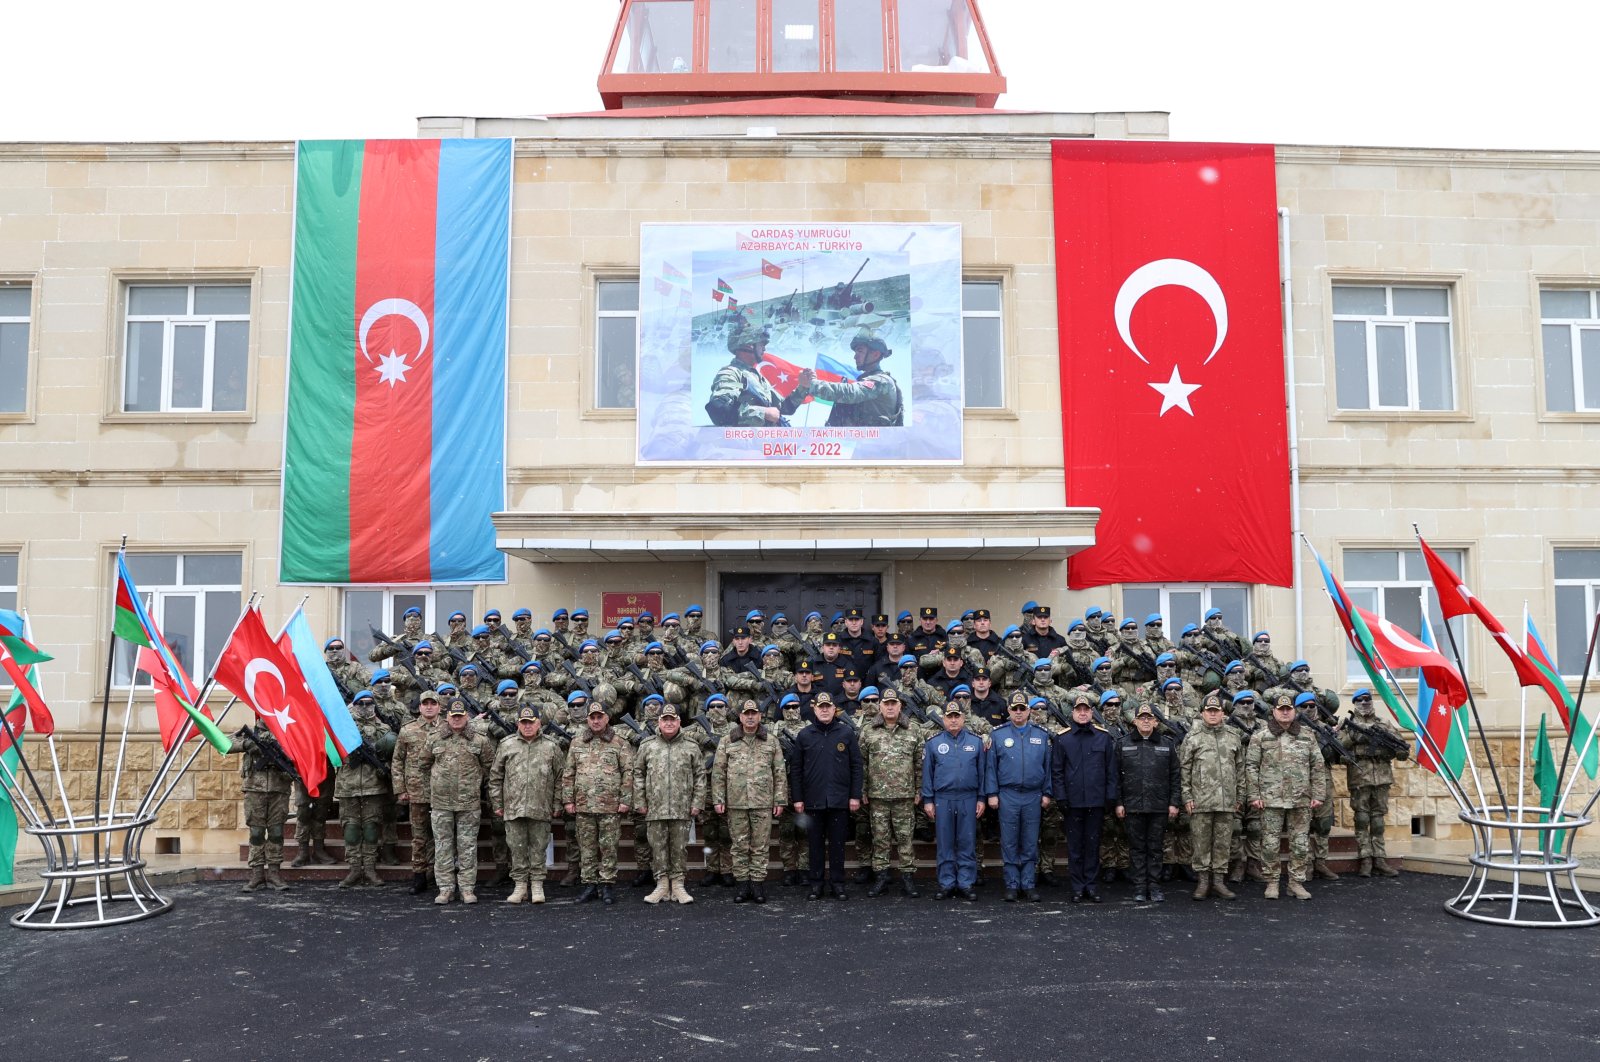 Türkiye and Azerbaijan&#039;s armed forces pose for a picture in Azerbaijan after completing the first day of a joint military exercise on Dec. 6, 2022. (AA Photo)